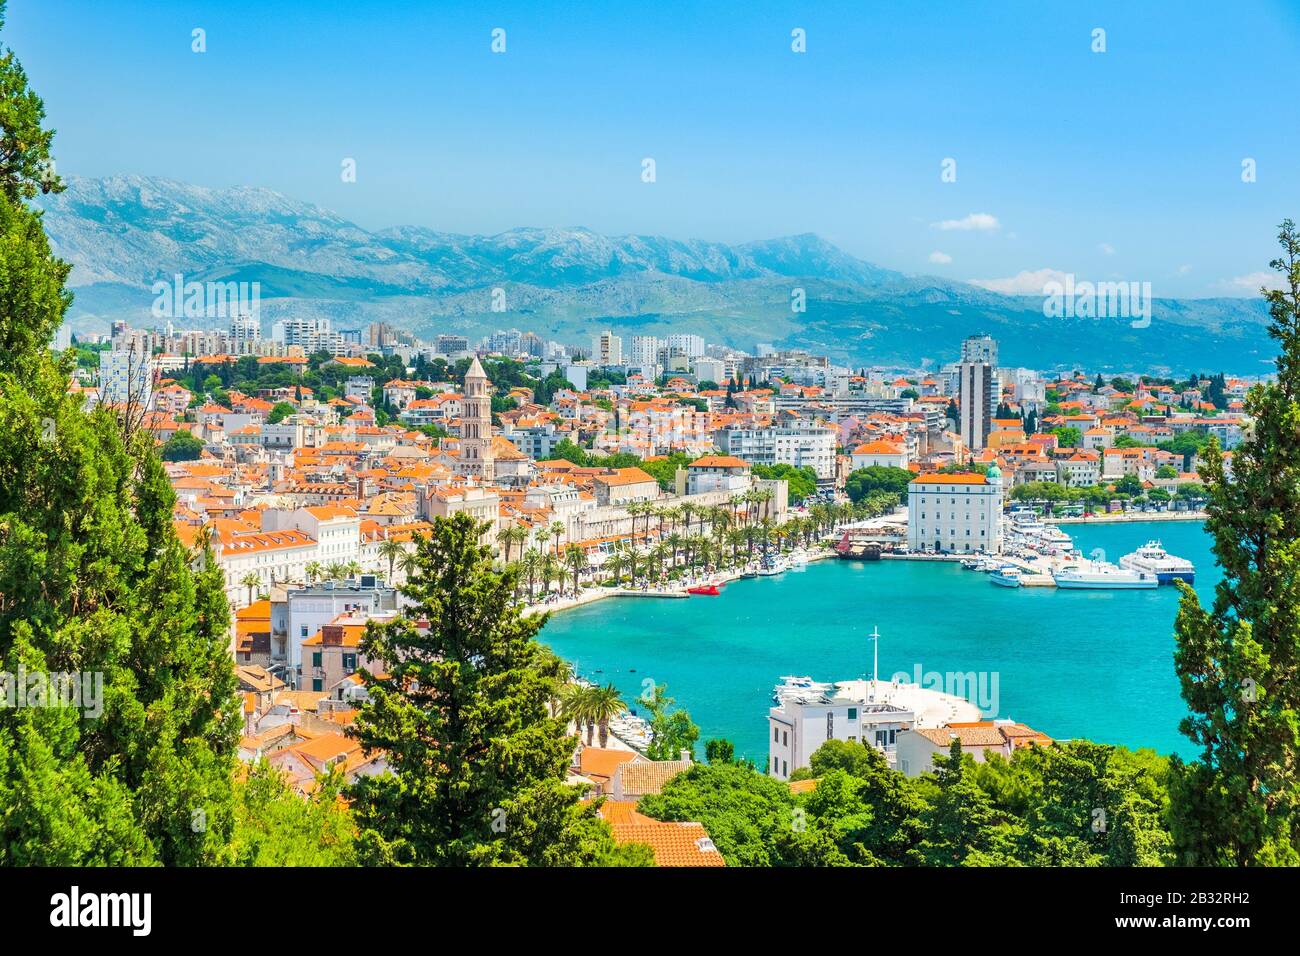 City of Split in Dalmatia, Croatia. City center, palace of Roman emperor Diocletian and cathedral, view through the pine trees. Popular tourist destin Stock Photo